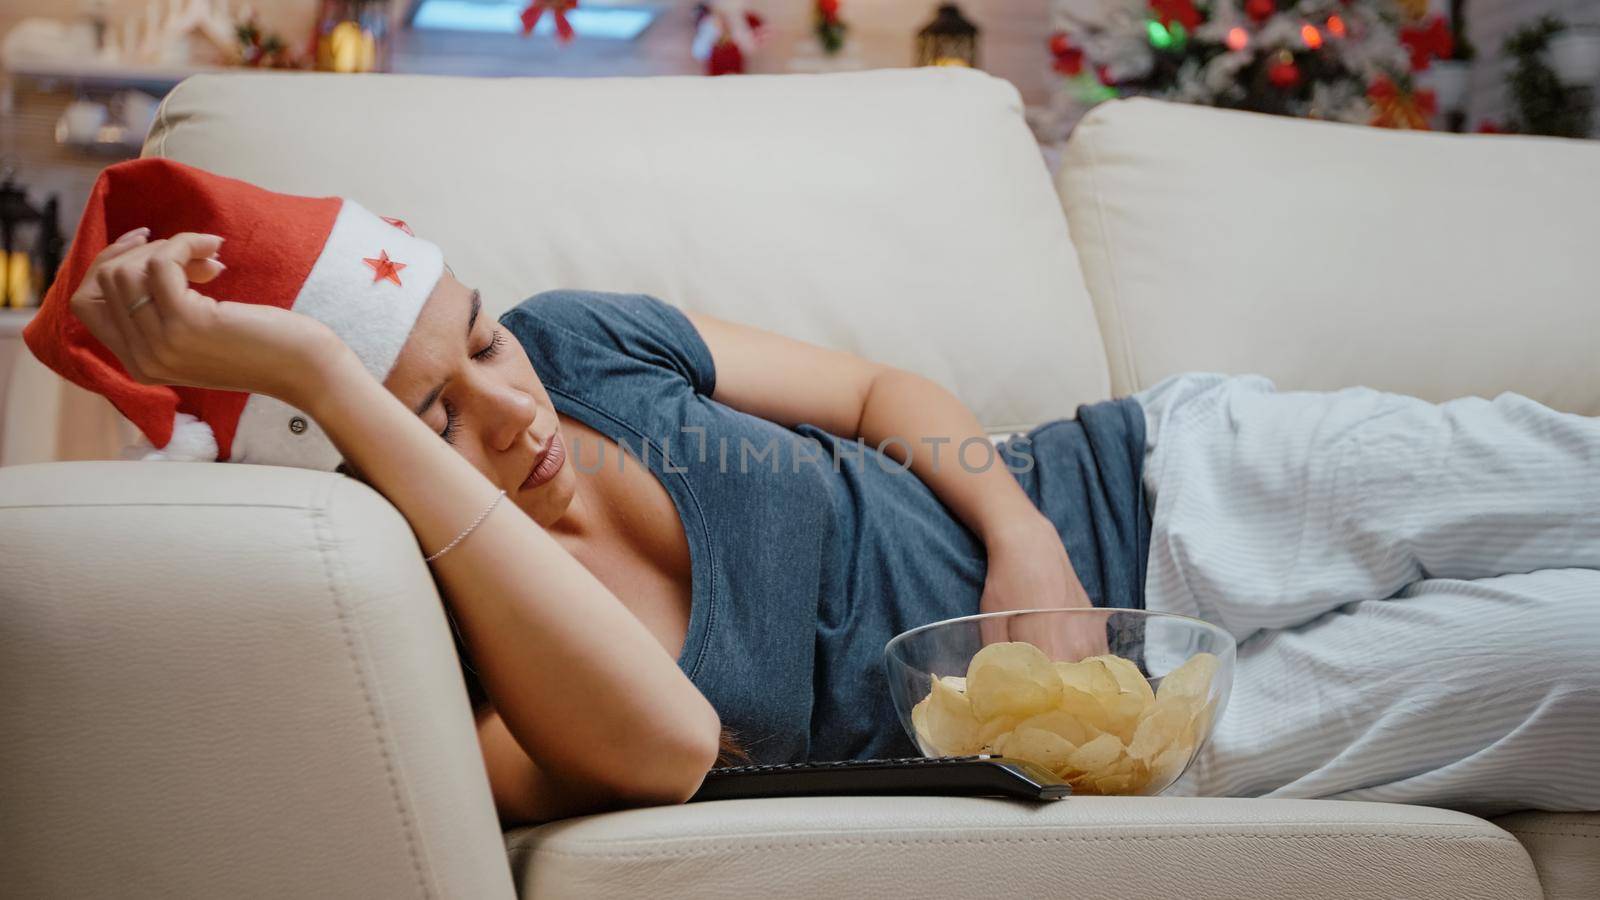 Close up of woman falling asleep while watching television on couch. Festive adult feeling sleepy, looking at TV on christmas eve celebration day. Tired person wearing santa hat